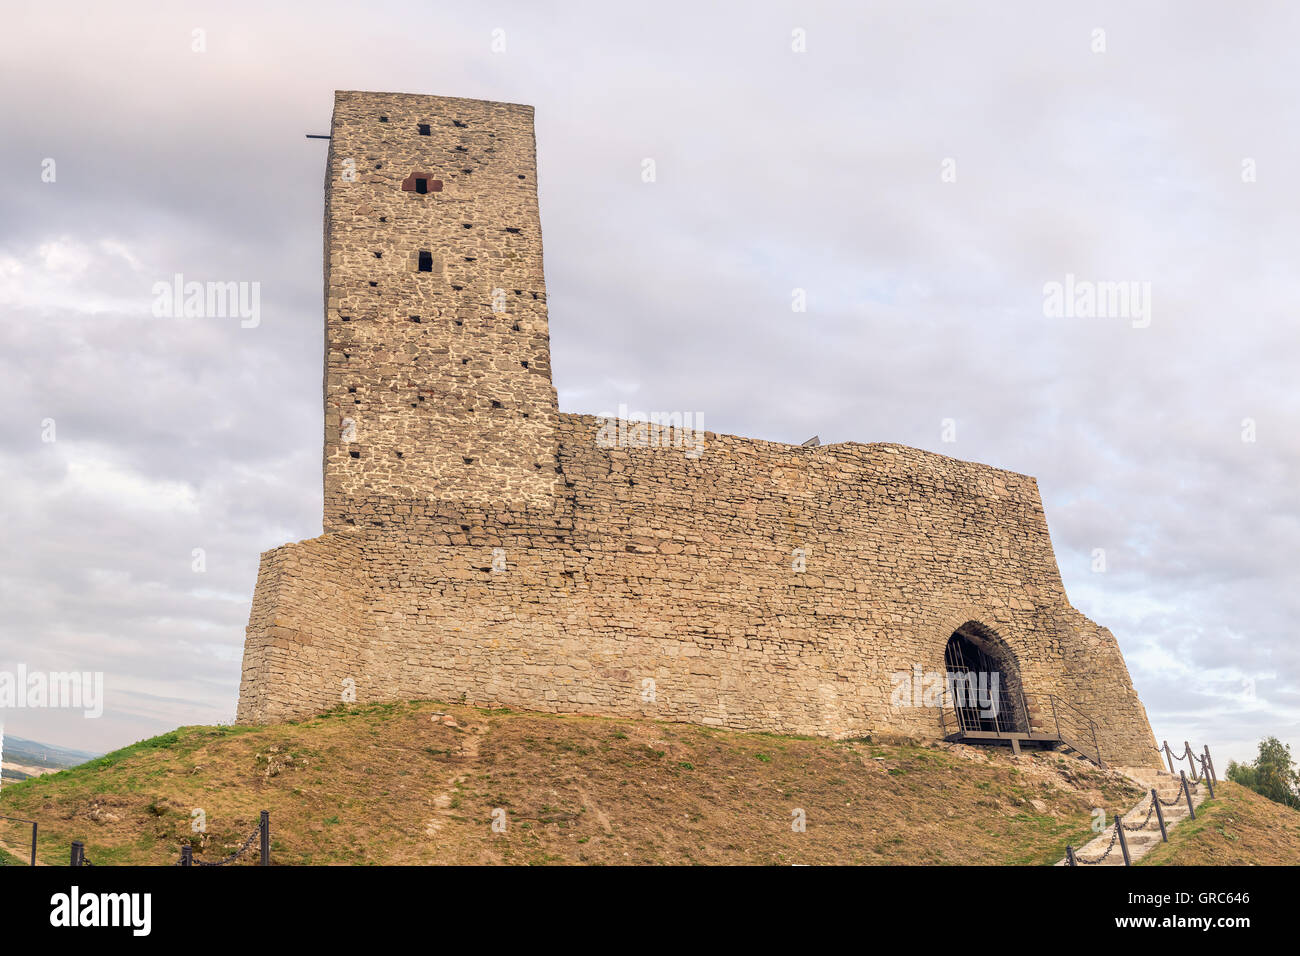 Ruins of medieval castle in Checiny, Poland Stock Photo